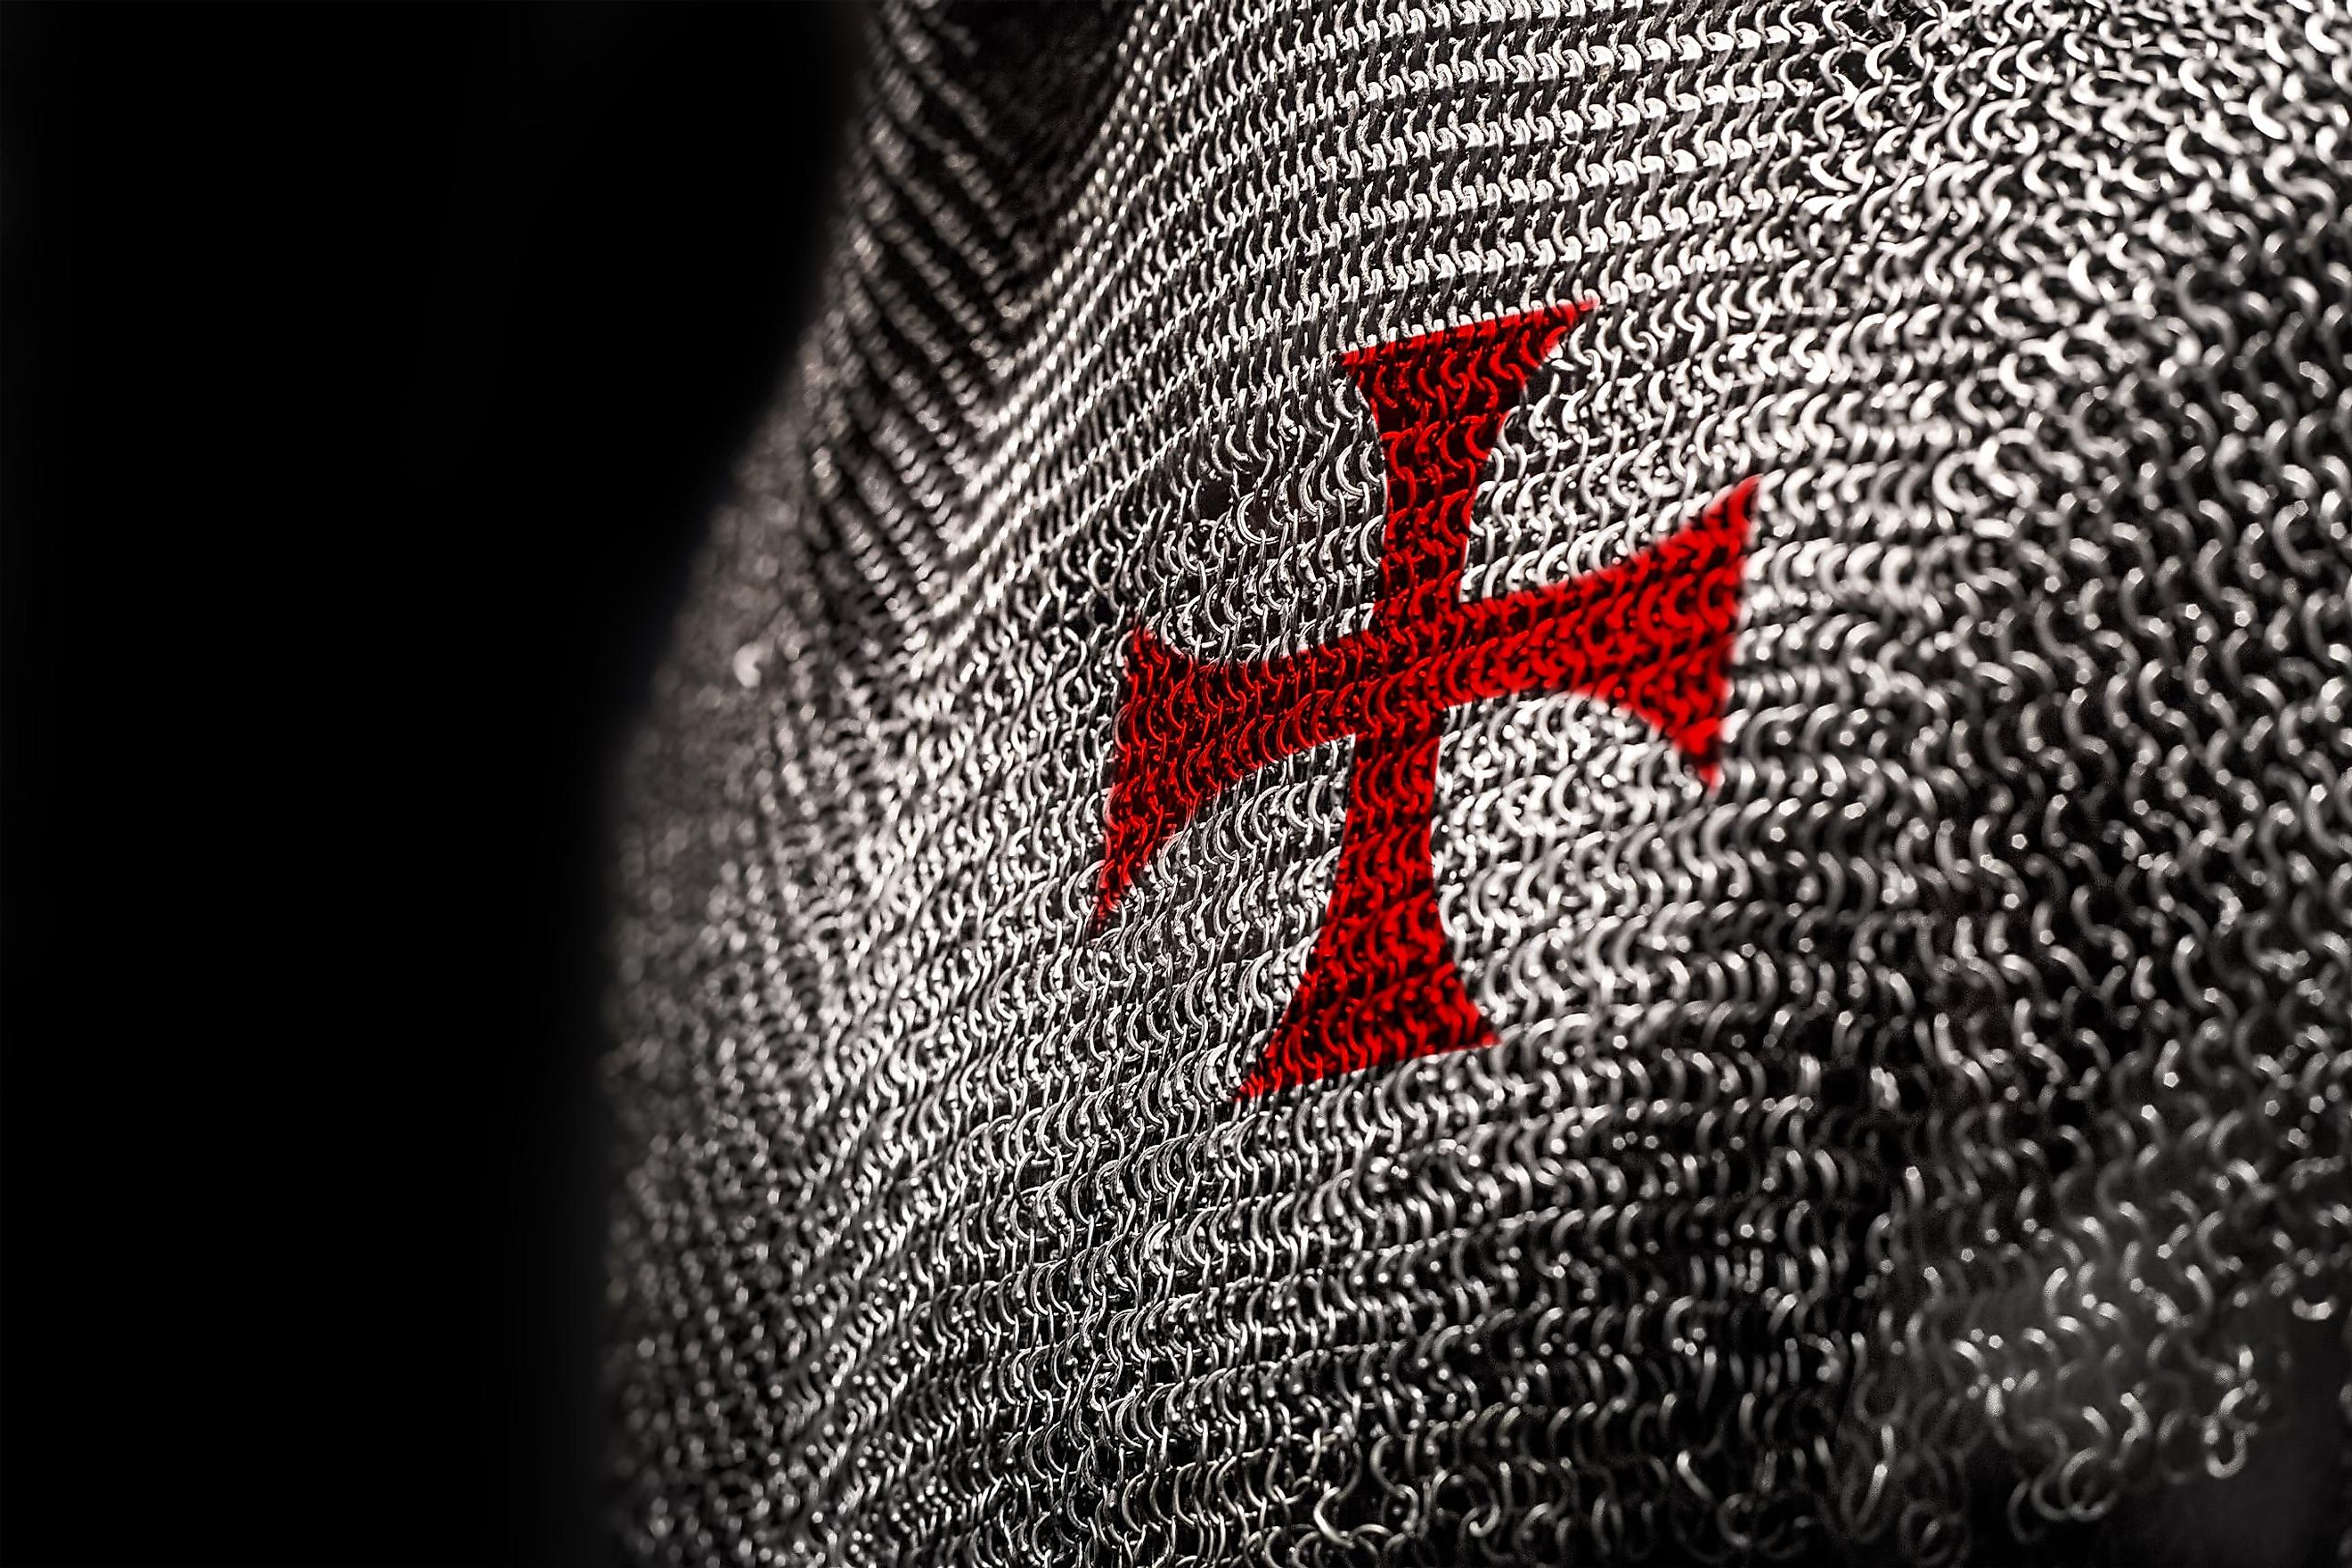 Chainmail featuring a cross of Saint George.